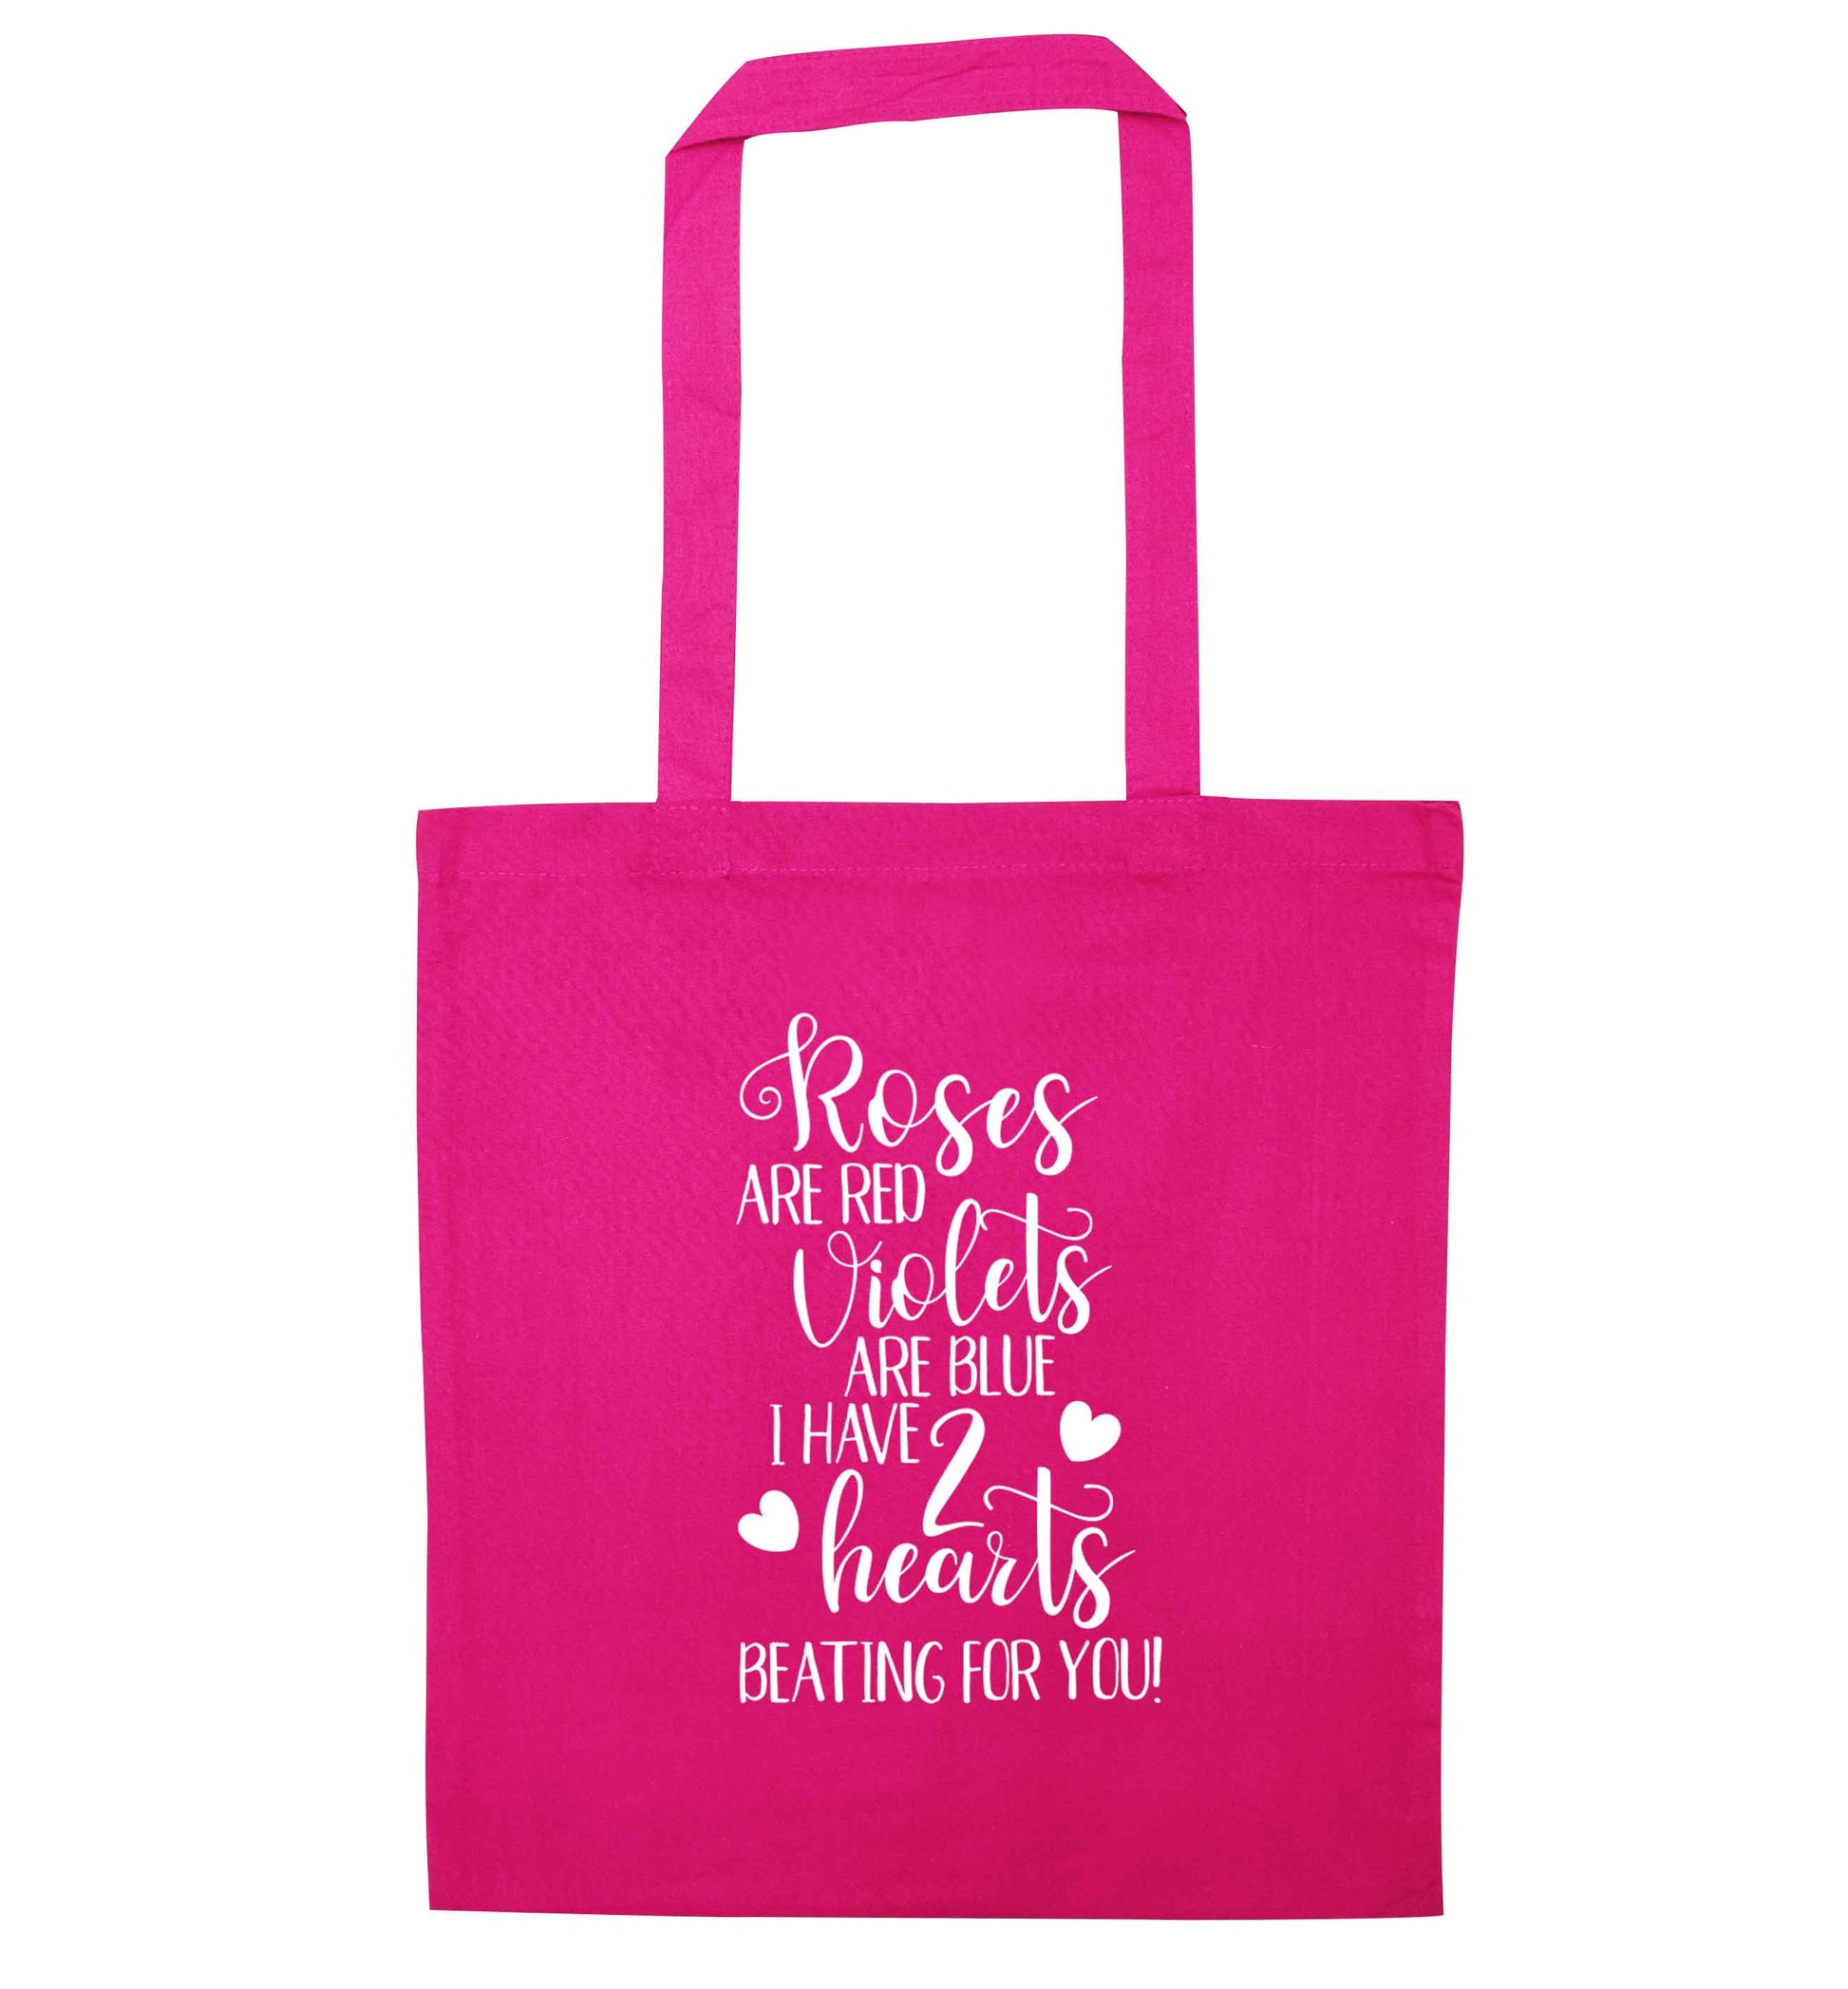 Roses are red violets are blue I have two hearts beating for you pink tote bag